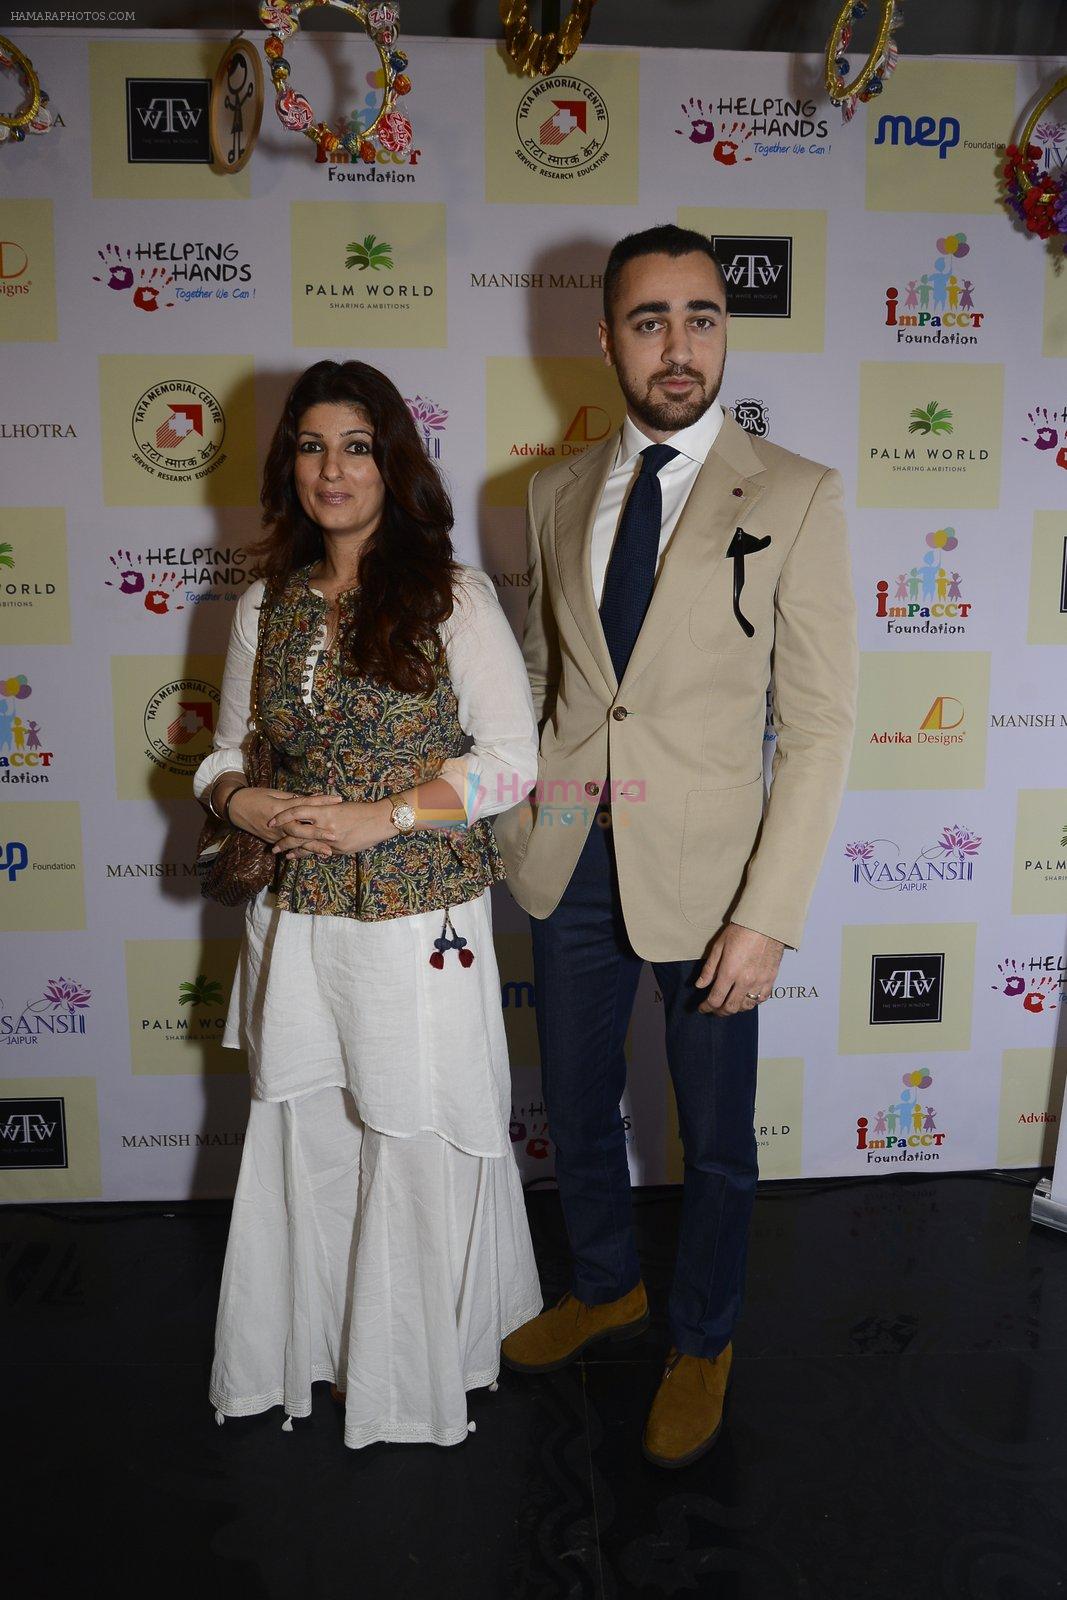 Twinkle khanna and Imran khan inaugurate helping hands exhibition in st regis on 13th Oct 2016